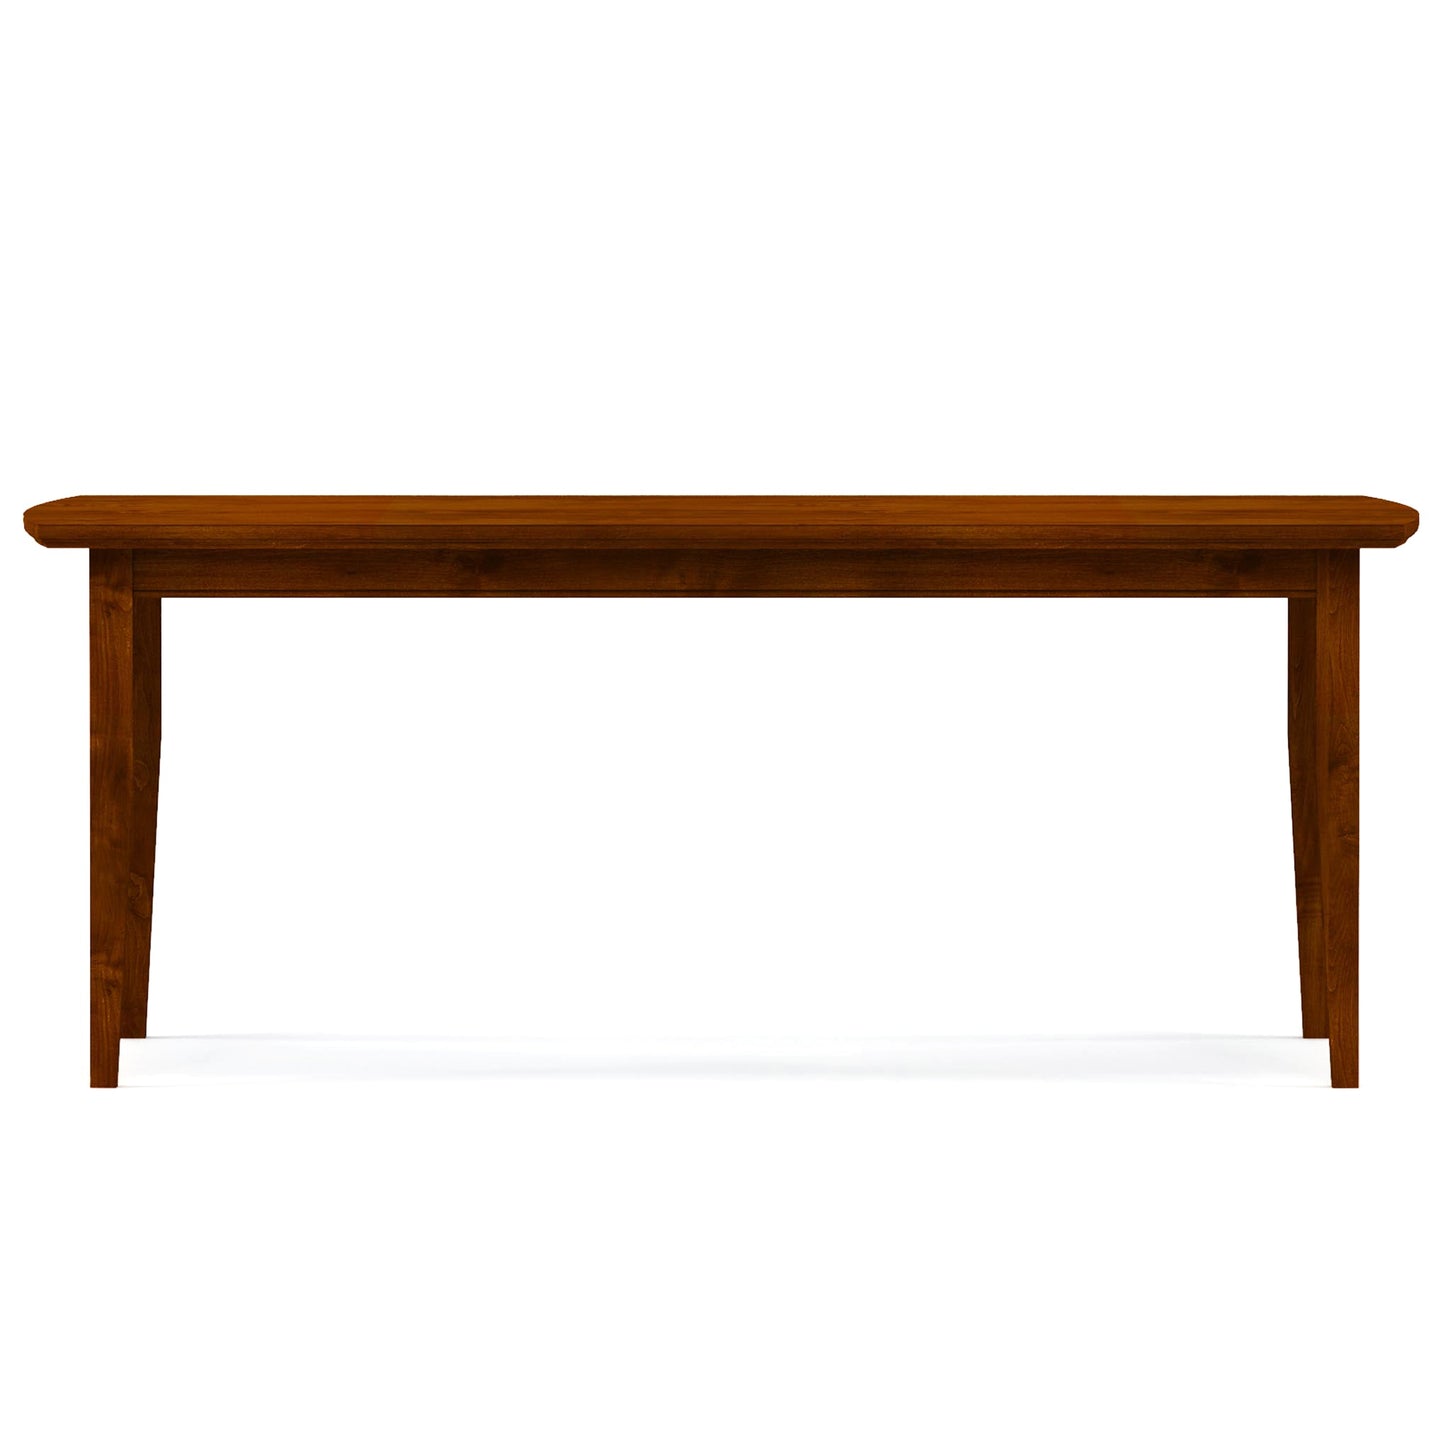 Revere 74-inch Dining Table